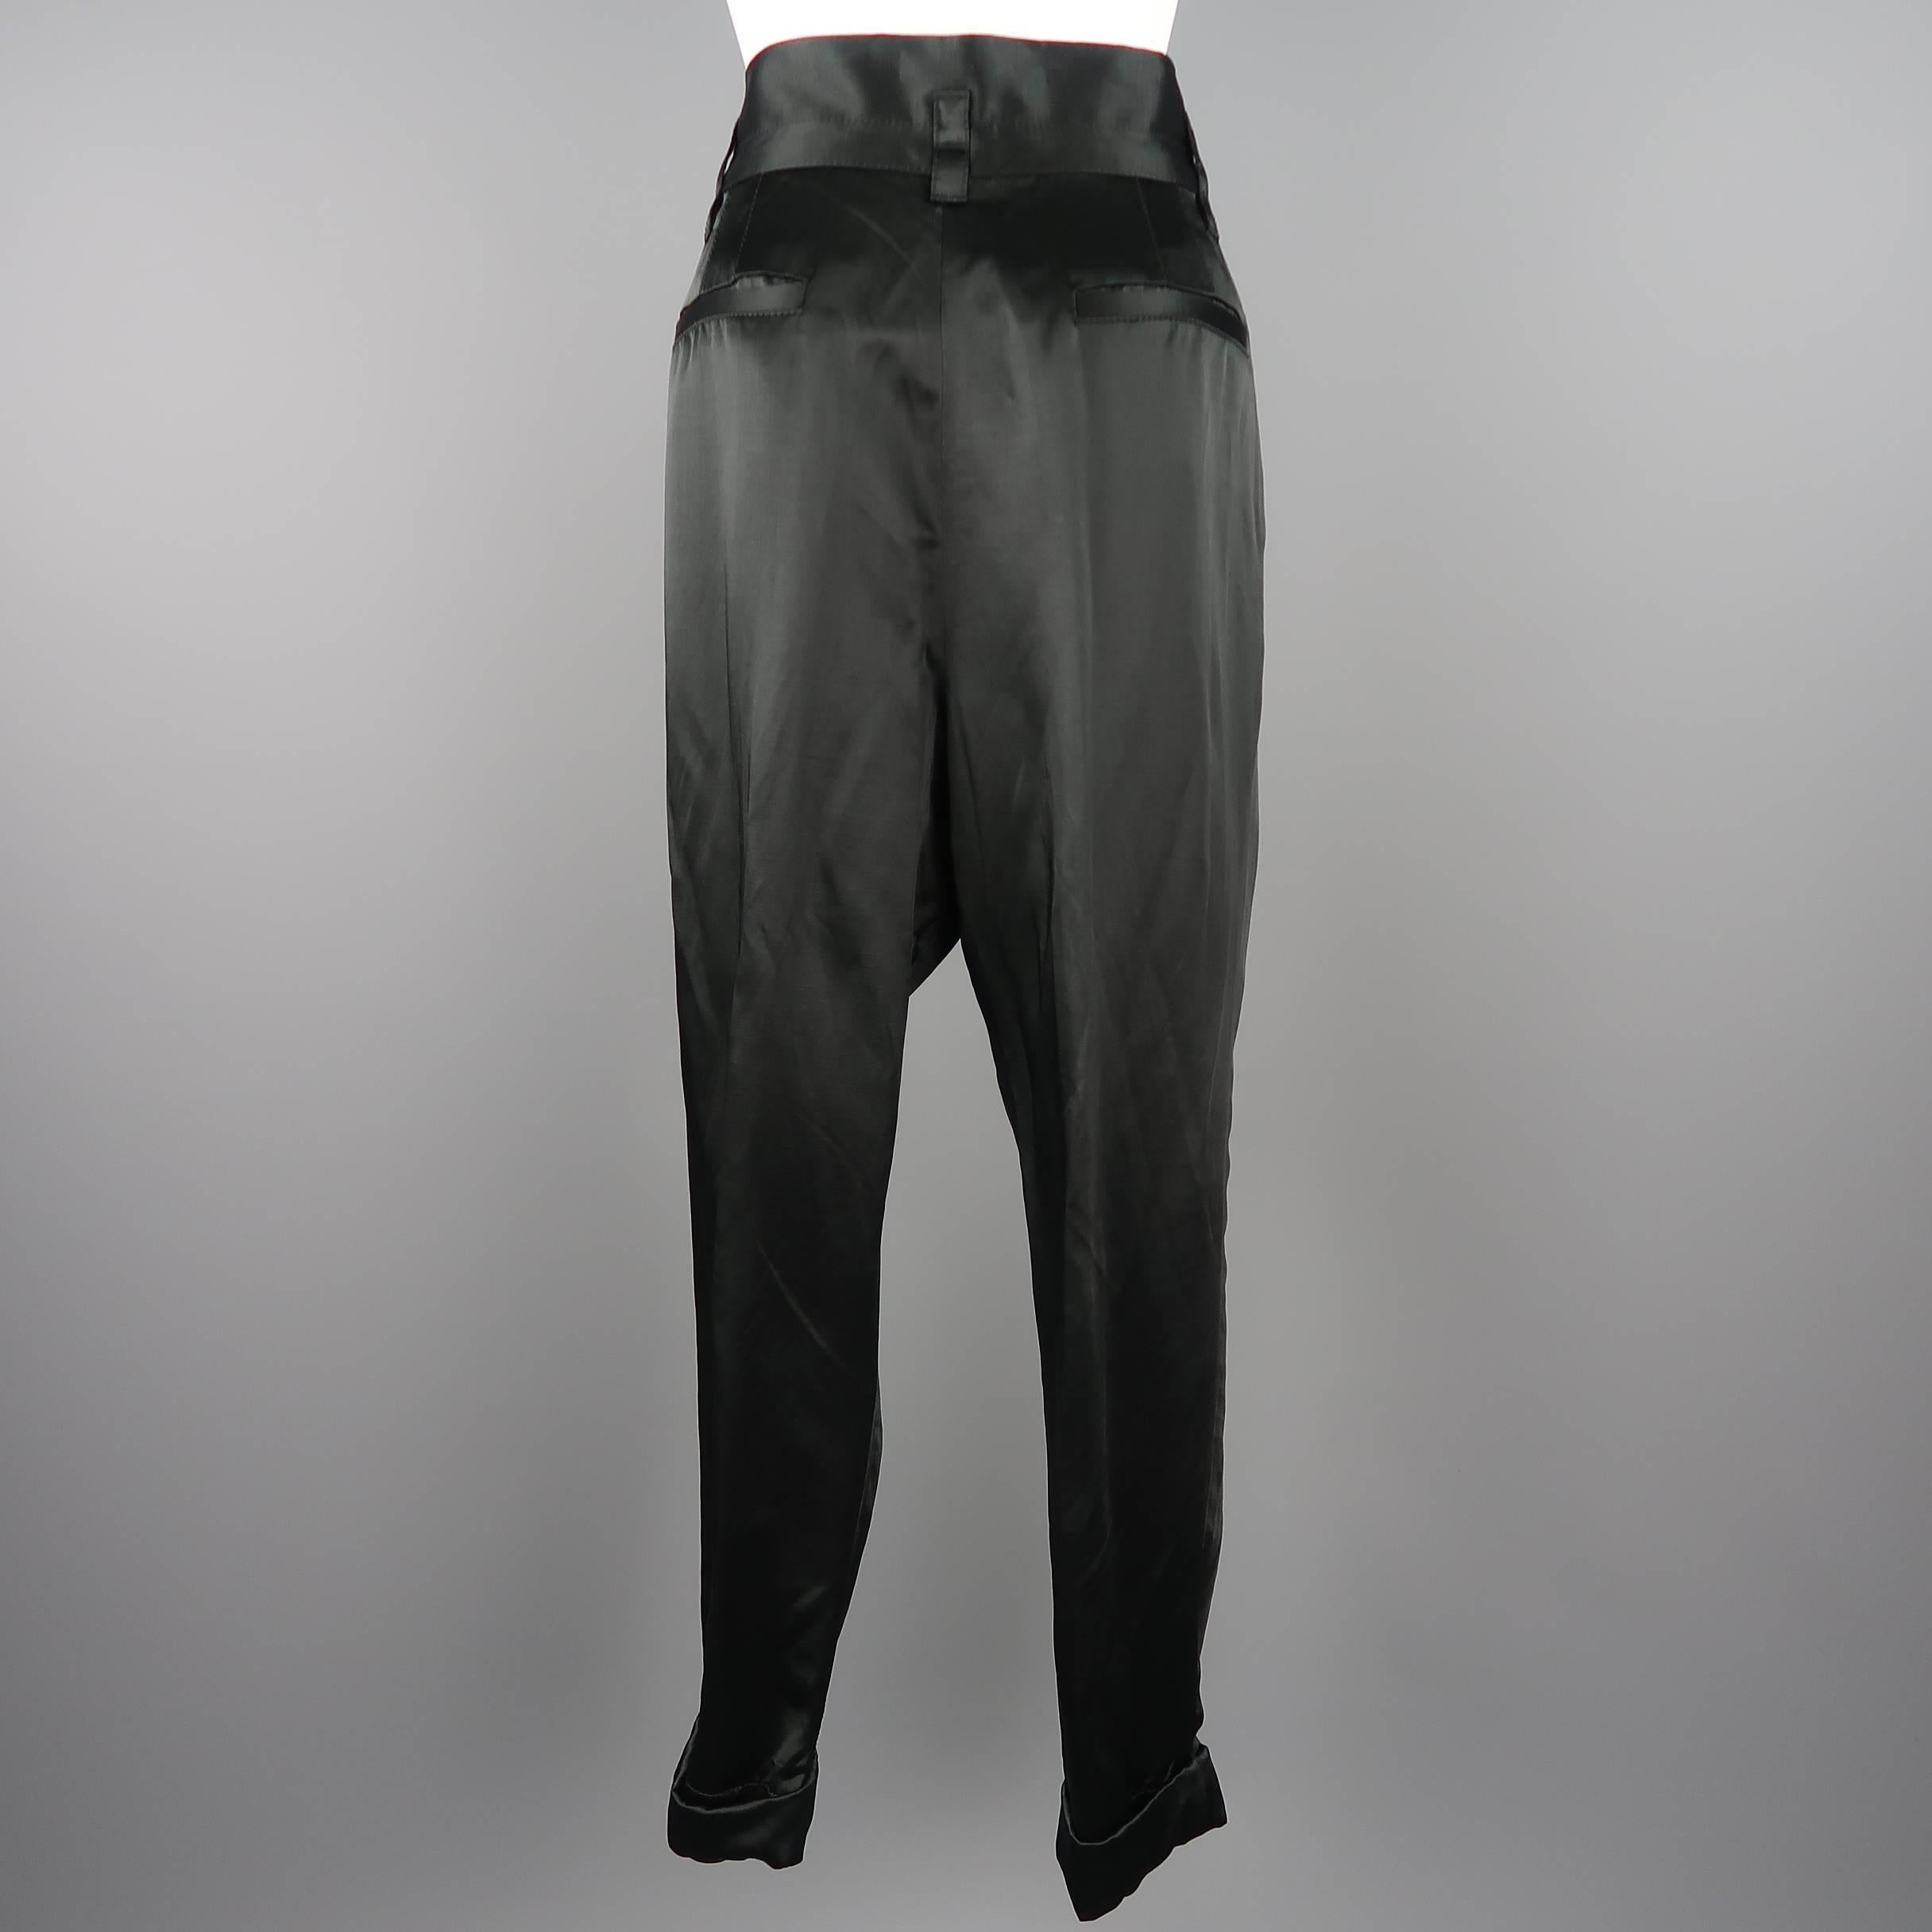 MARC JACOBS Size 4 Black Linen Blend Satin Pleated Cuffed Pants 2